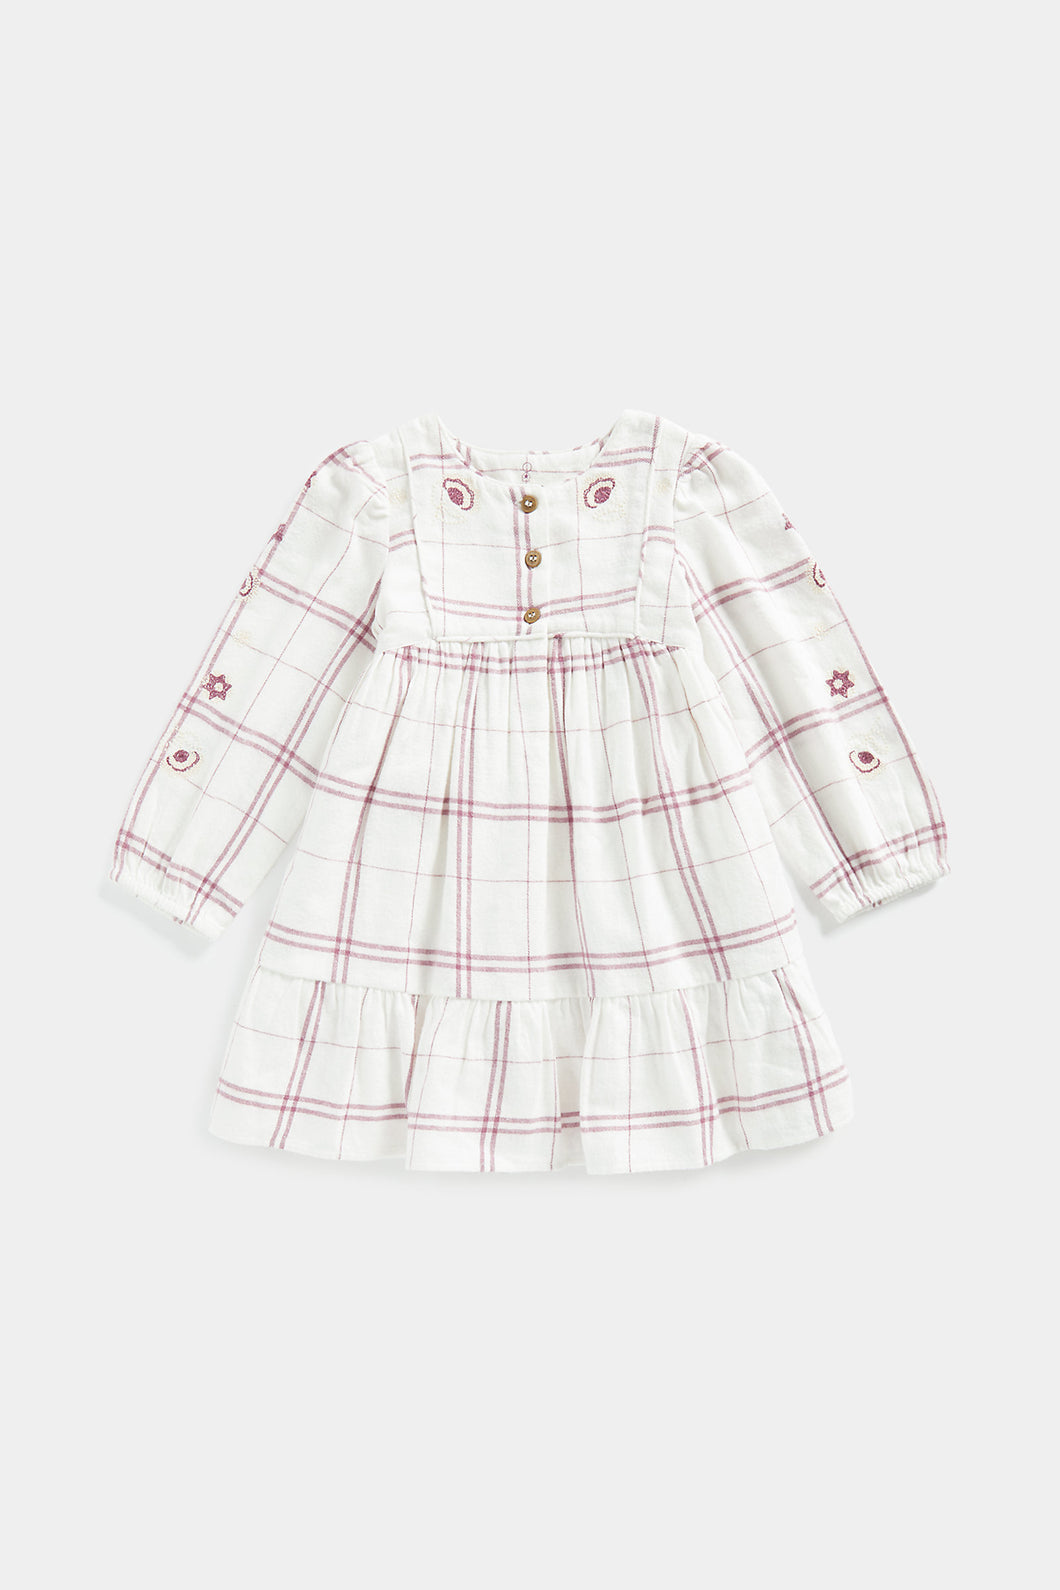 Mothercare Pink Checked Dress